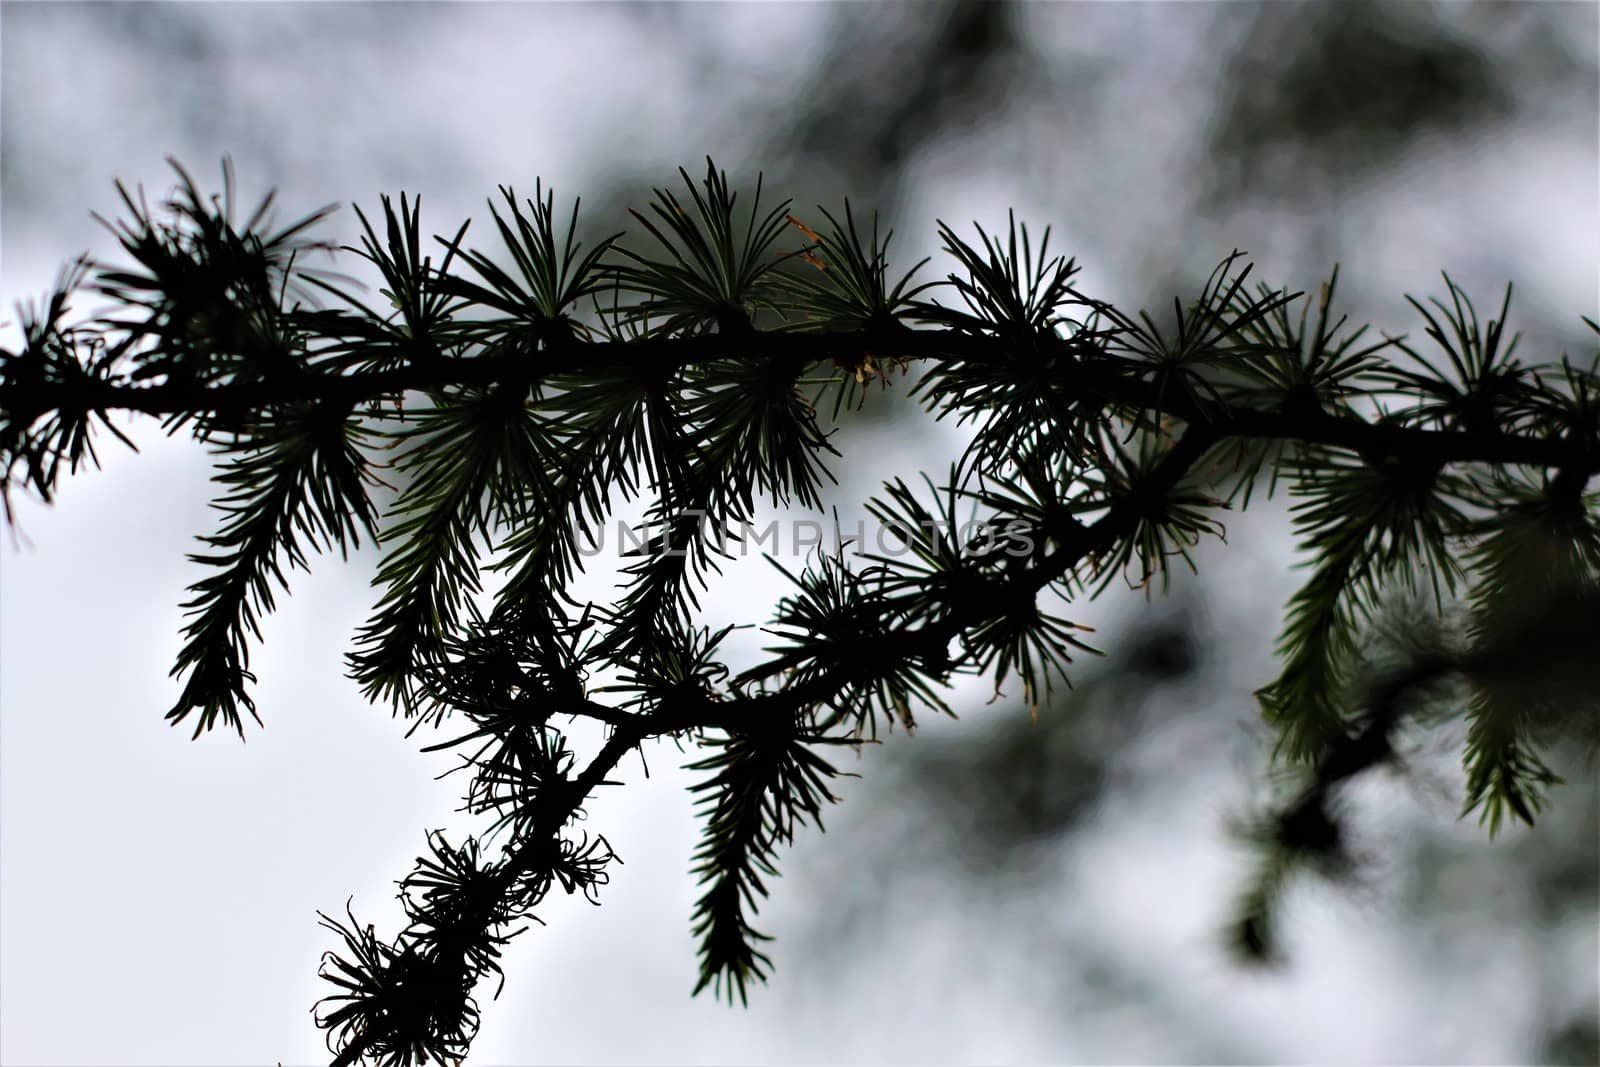 Spruce needles on the branch as a close up in the backlight